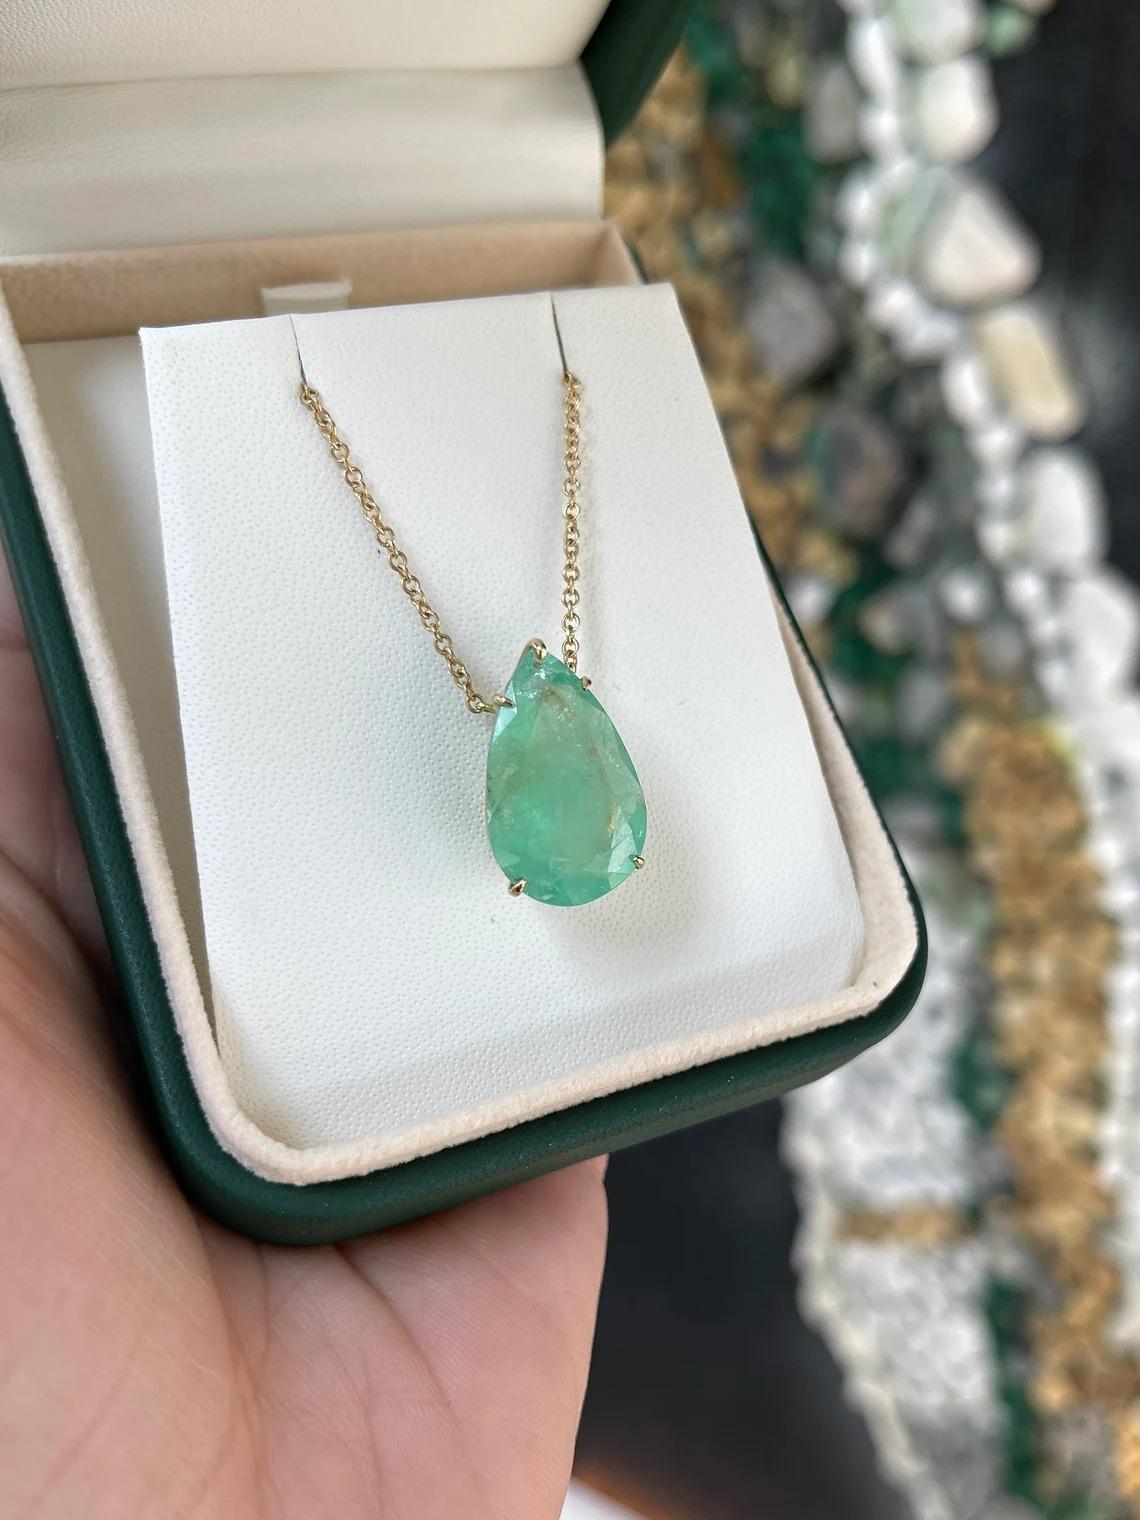 Displayed is a classic Colombian emerald solitaire necklace set in 14K yellow gold. This gorgeous solitaire piece carries a massive, natural Colombian emerald in a five-prong setting. Fully faceted, this gemstone showcases great shine. The emerald